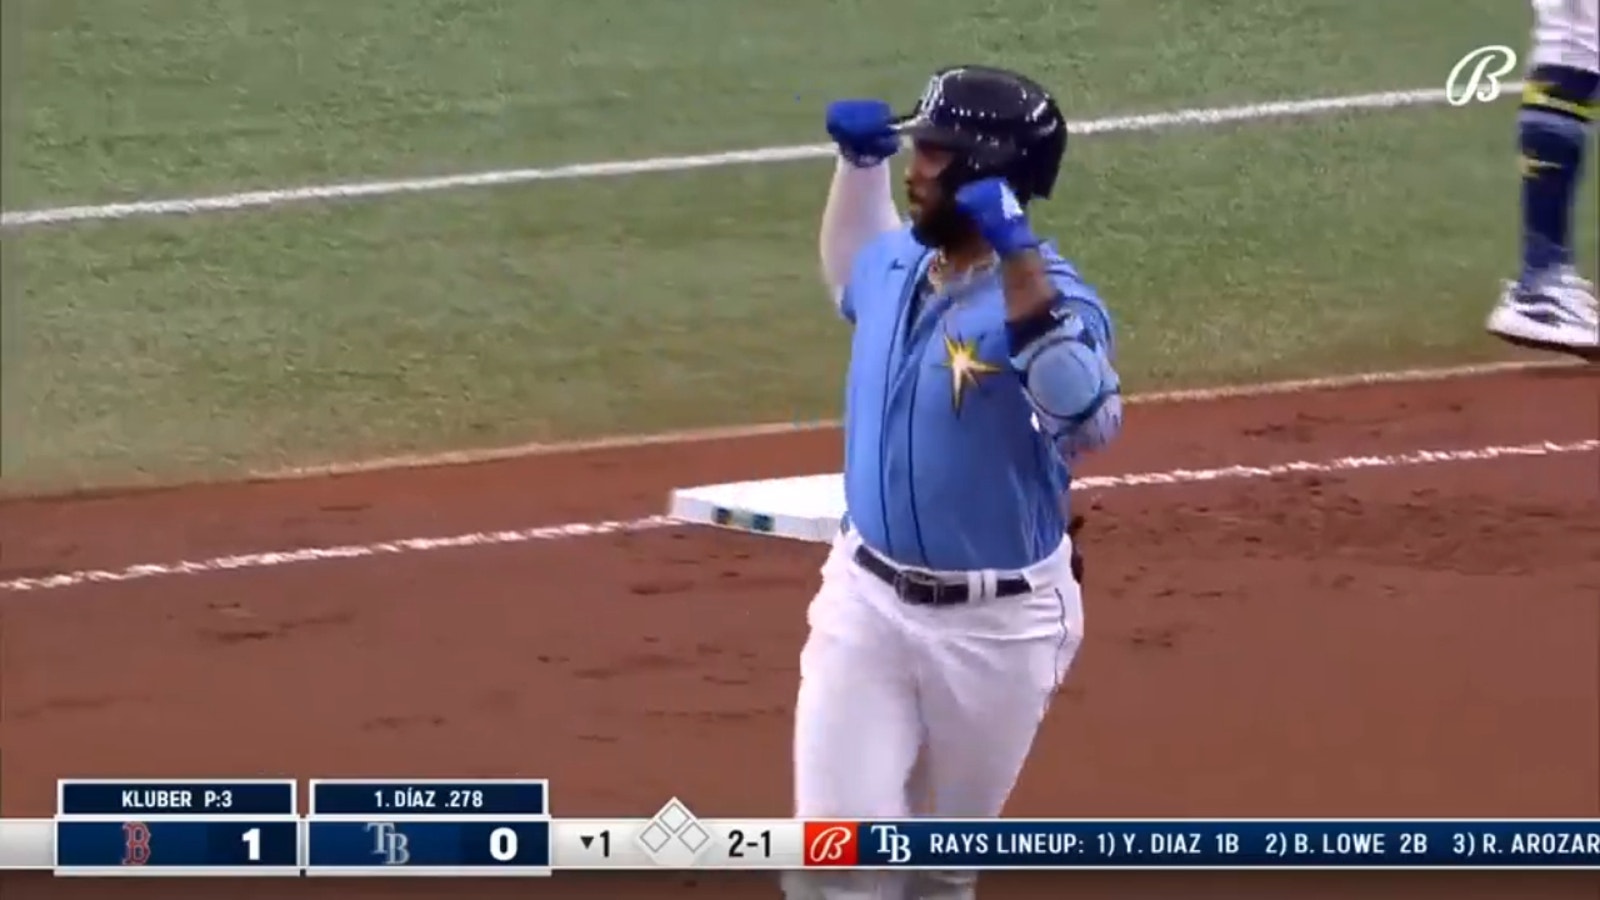 Yandy Diaz smashes a home run as the Rays are tied 1-1 with the Red Sox